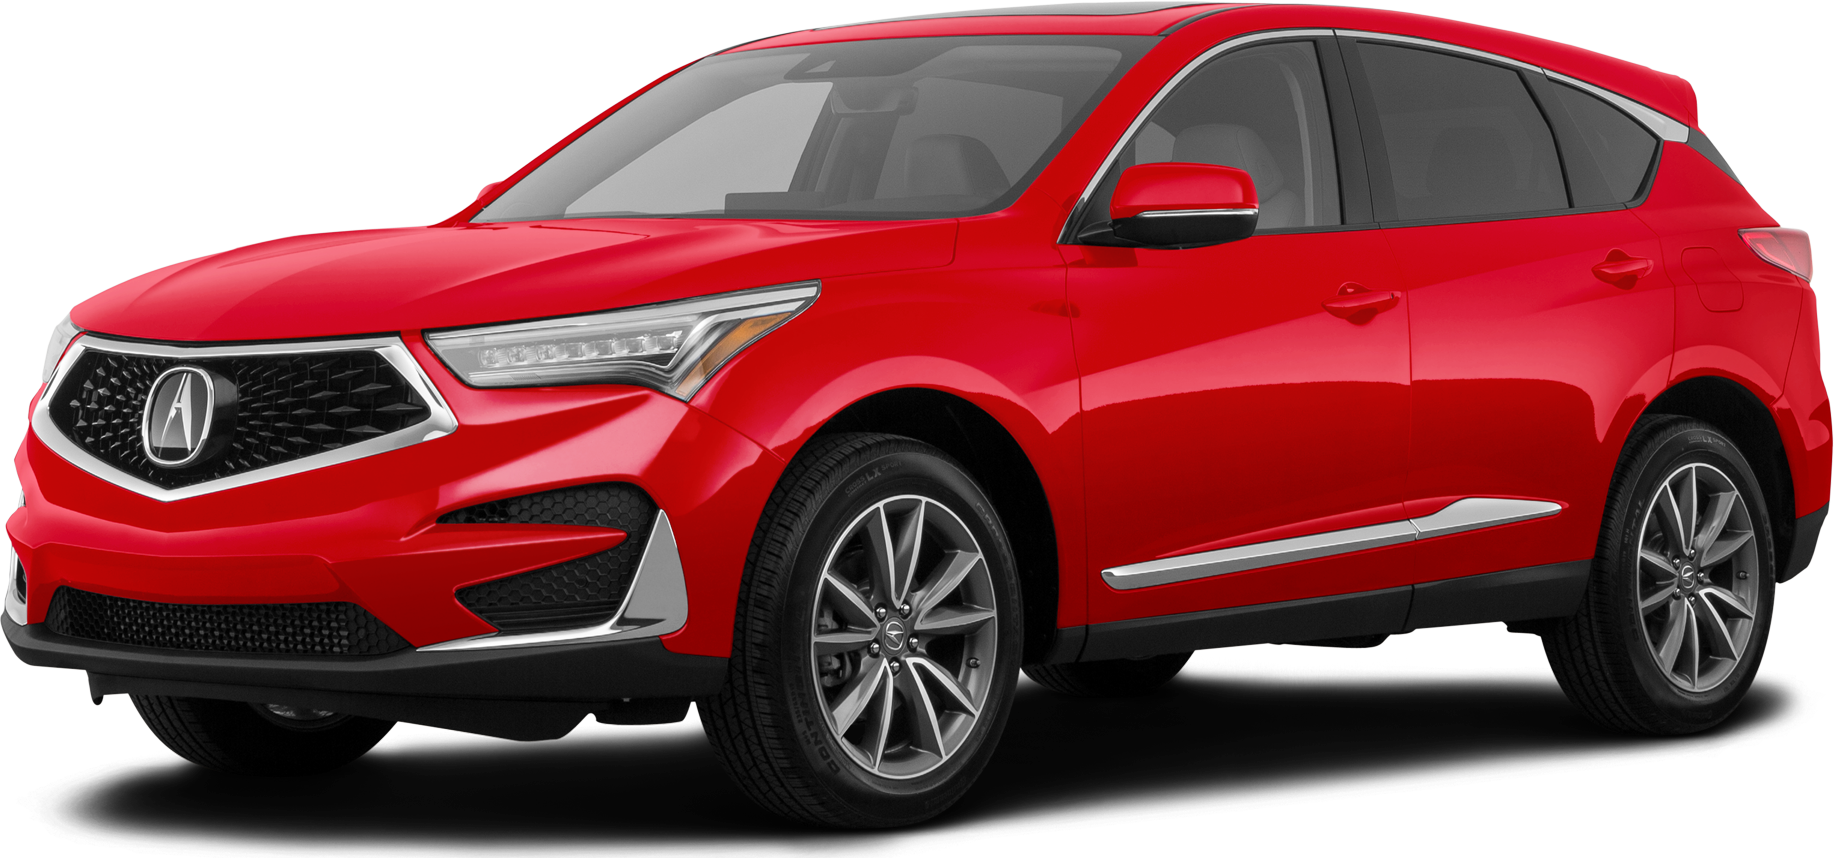 2021 Acura RDX Price, Value, Ratings & Reviews Kelley Blue Book